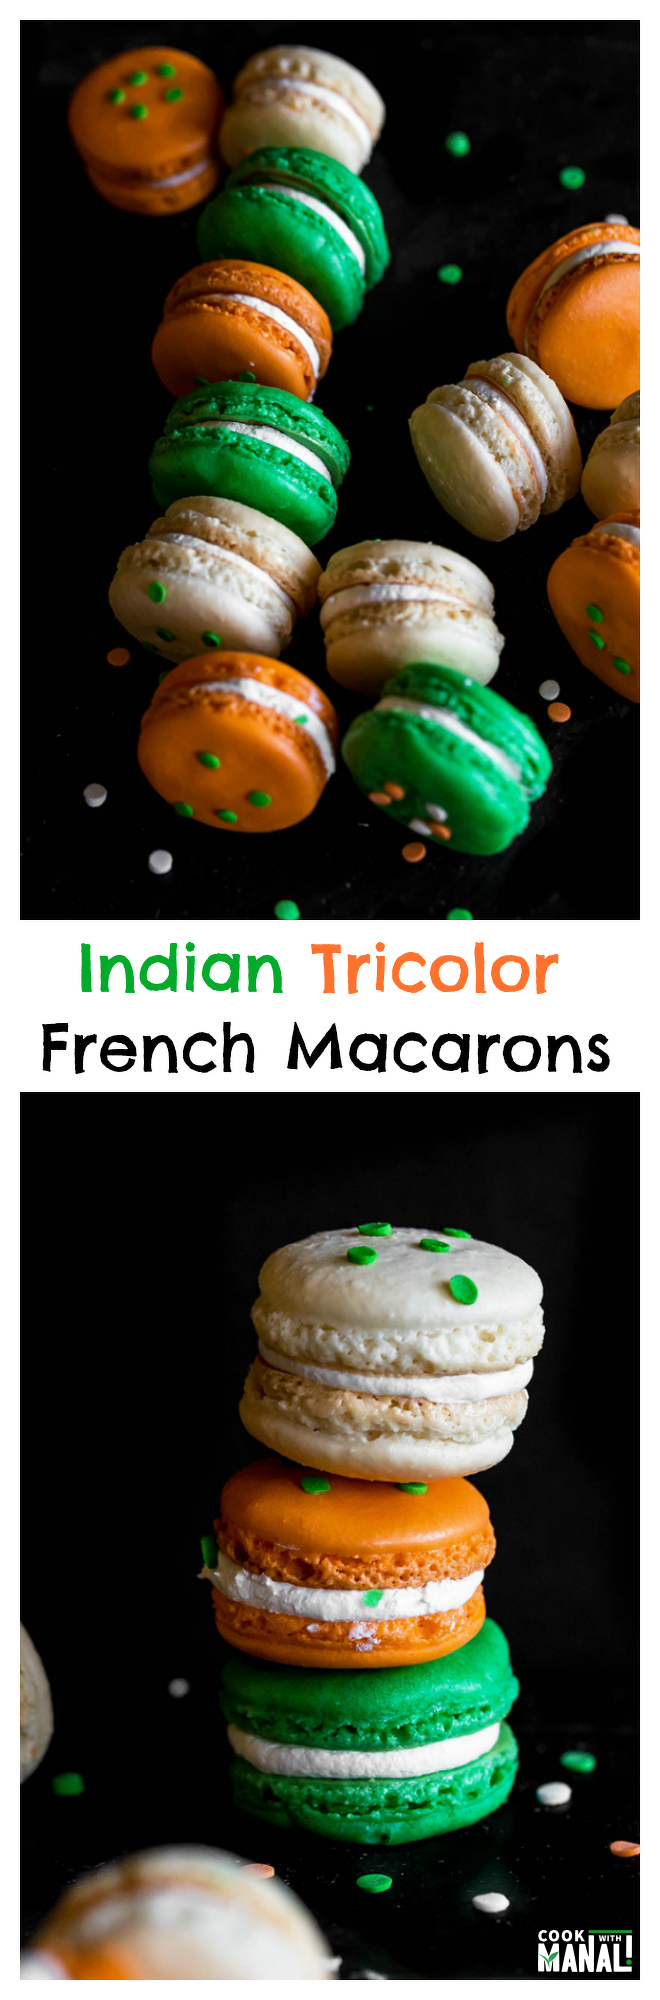 Indian Tricolor French Macarons-Collage